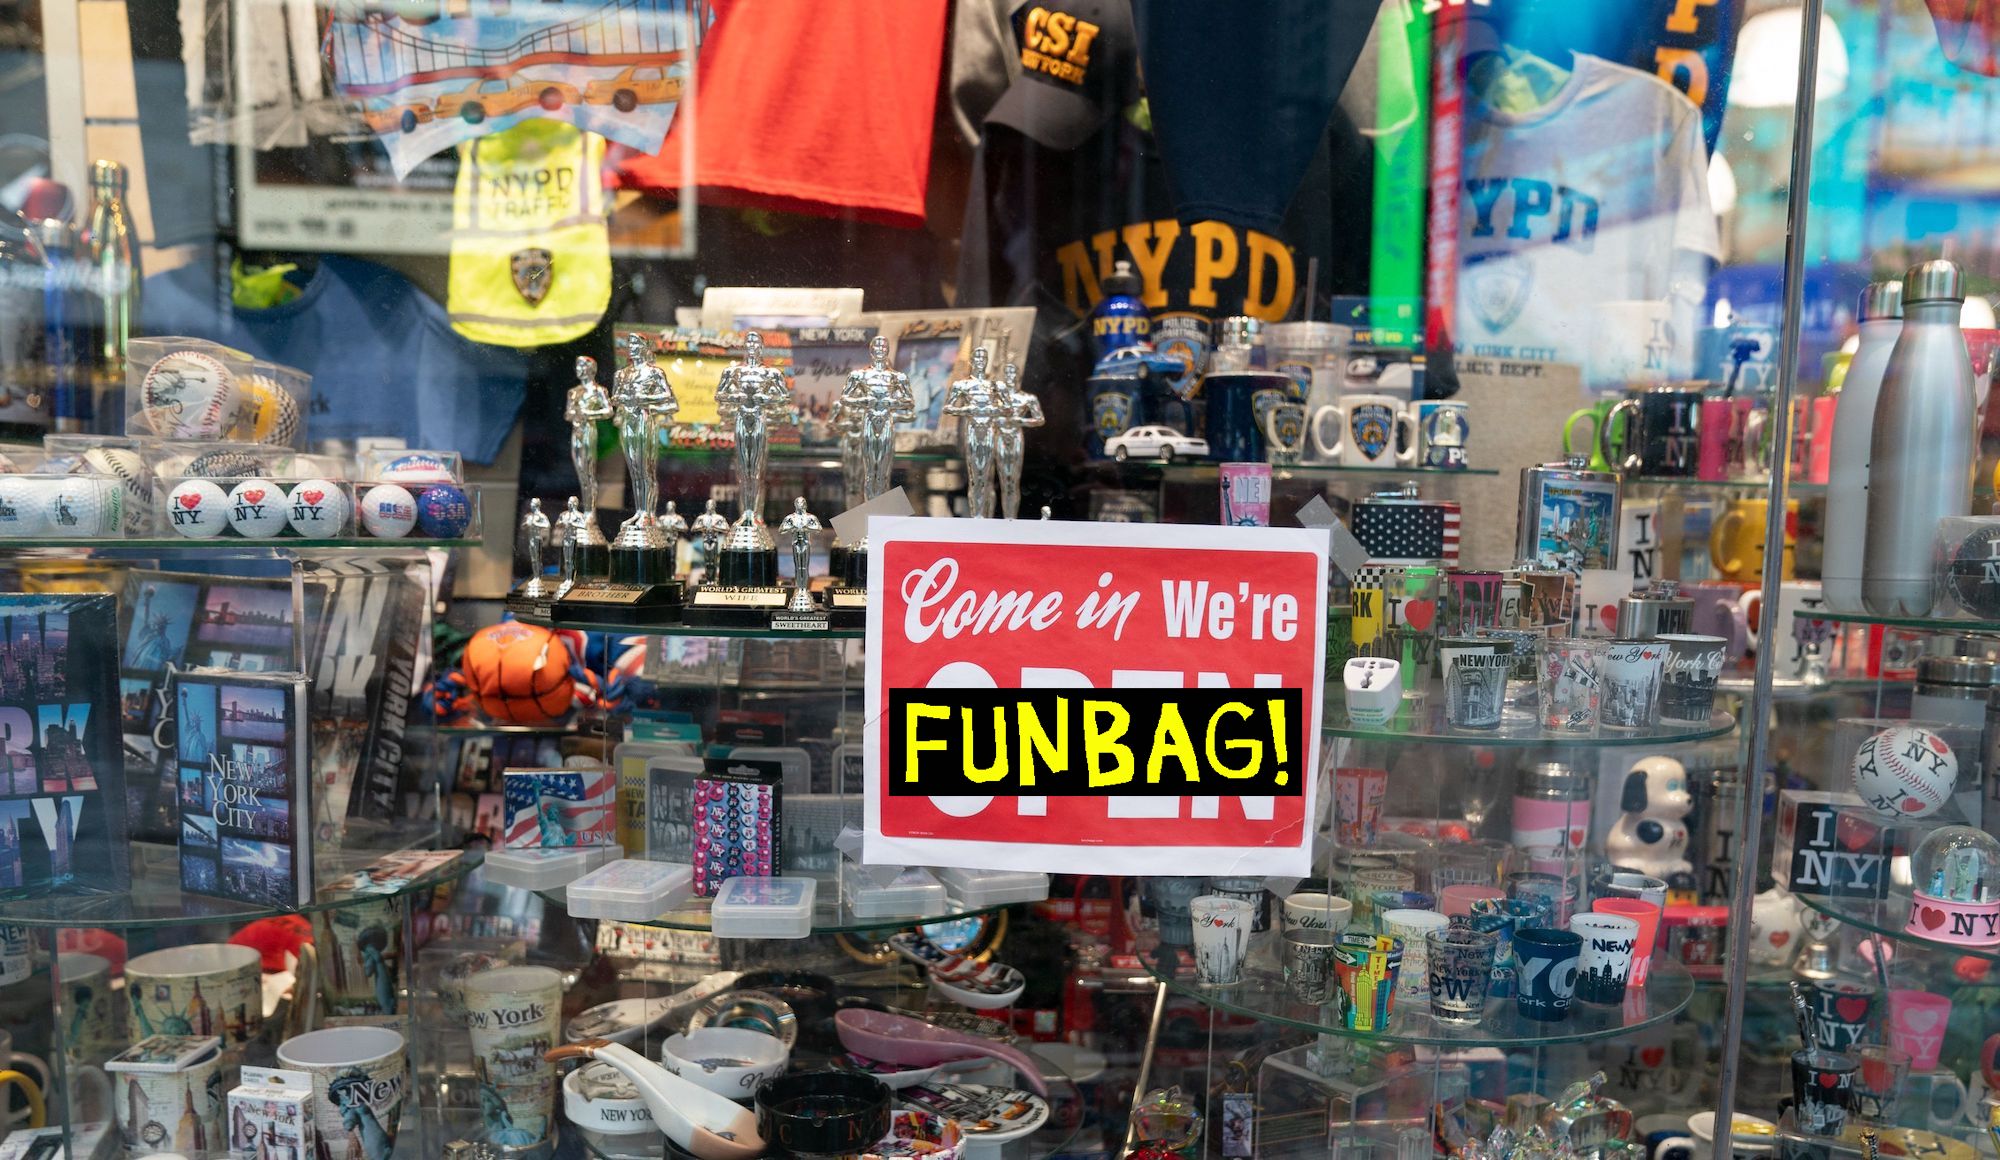 An open sign in the window of a gift shop is seen in Times Square on August 16, 2020 in New York. Five months after New York City shut down to combat the coronavirus, the tourism industry remains flat. Business leaders and City officials are trying to devise plans to revive the tourism industry that has in years past brought in $45 billion annually and supported 300,000 jobs. (Photo by Bryan R. Smith / AFP) (Photo by BRYAN R. SMITH/AFP via Getty Images)